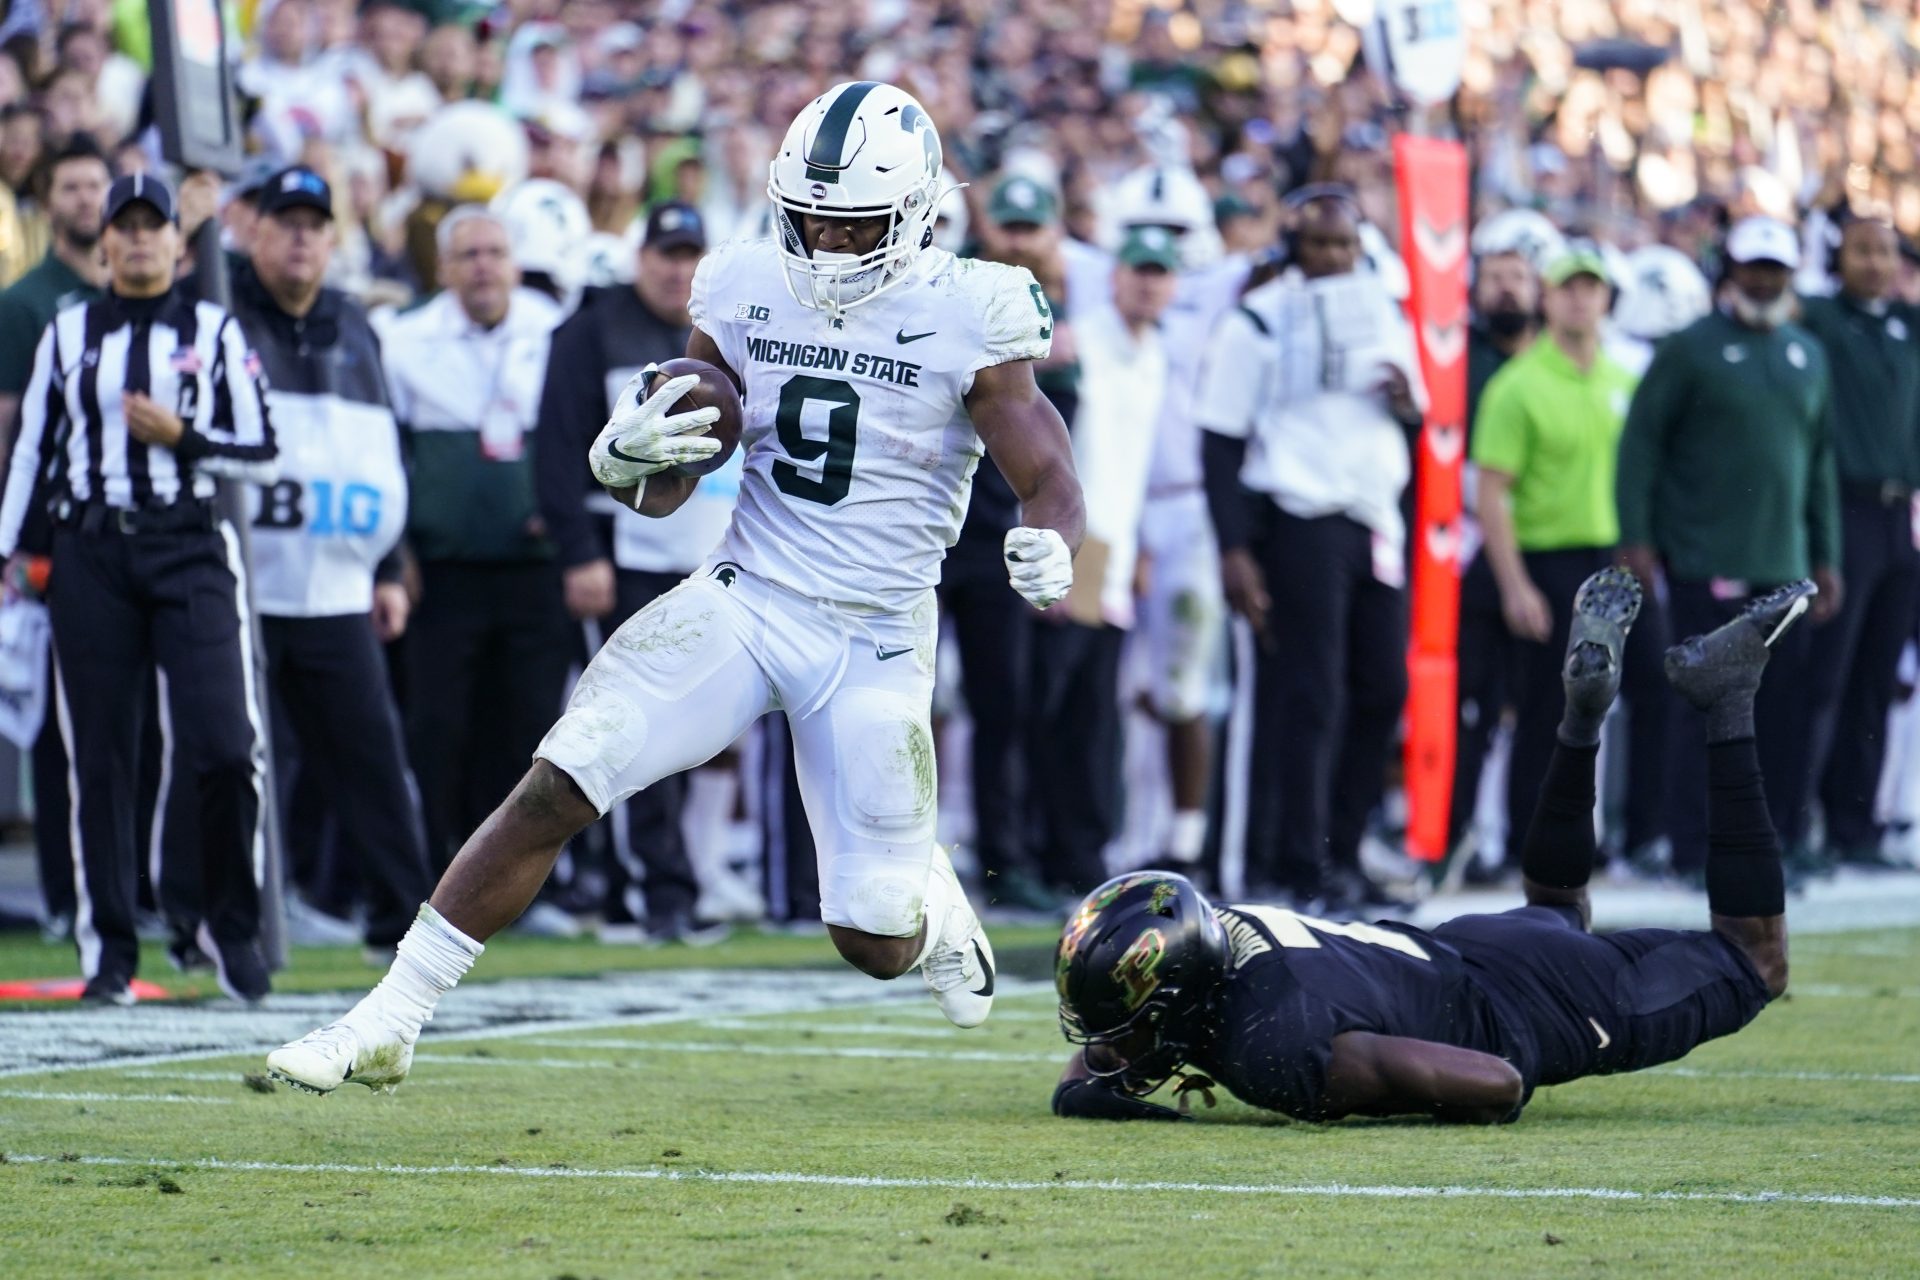 Michigan State running back Kenneth Walker III (9) breaks the tackle of Purdue cornerback Jamari Brown (7) on his way to a touchdown during the first half of an NCAA college football game in West Lafayette, Ind., Nov. 6, 2021.